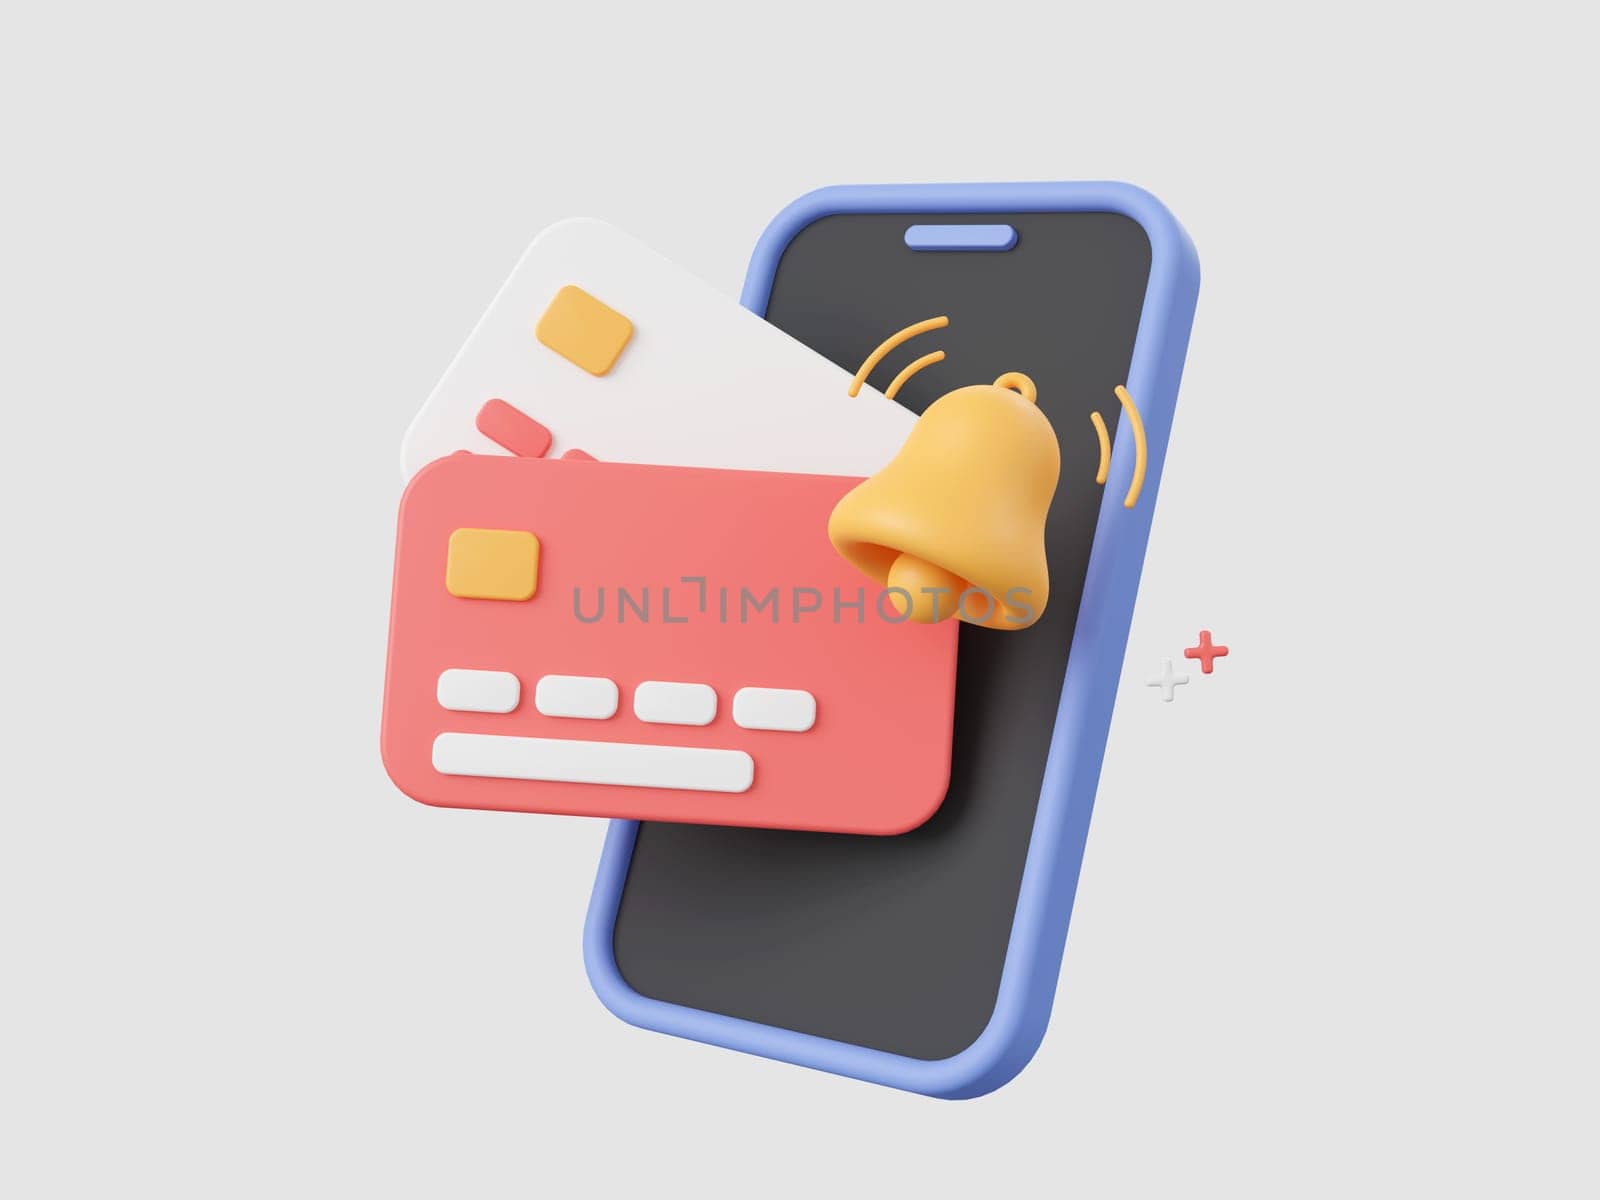 3d cartoon design illustration of Notification bell via smartphone application online payments concept, money transfer, financial transactions and credit card payments.